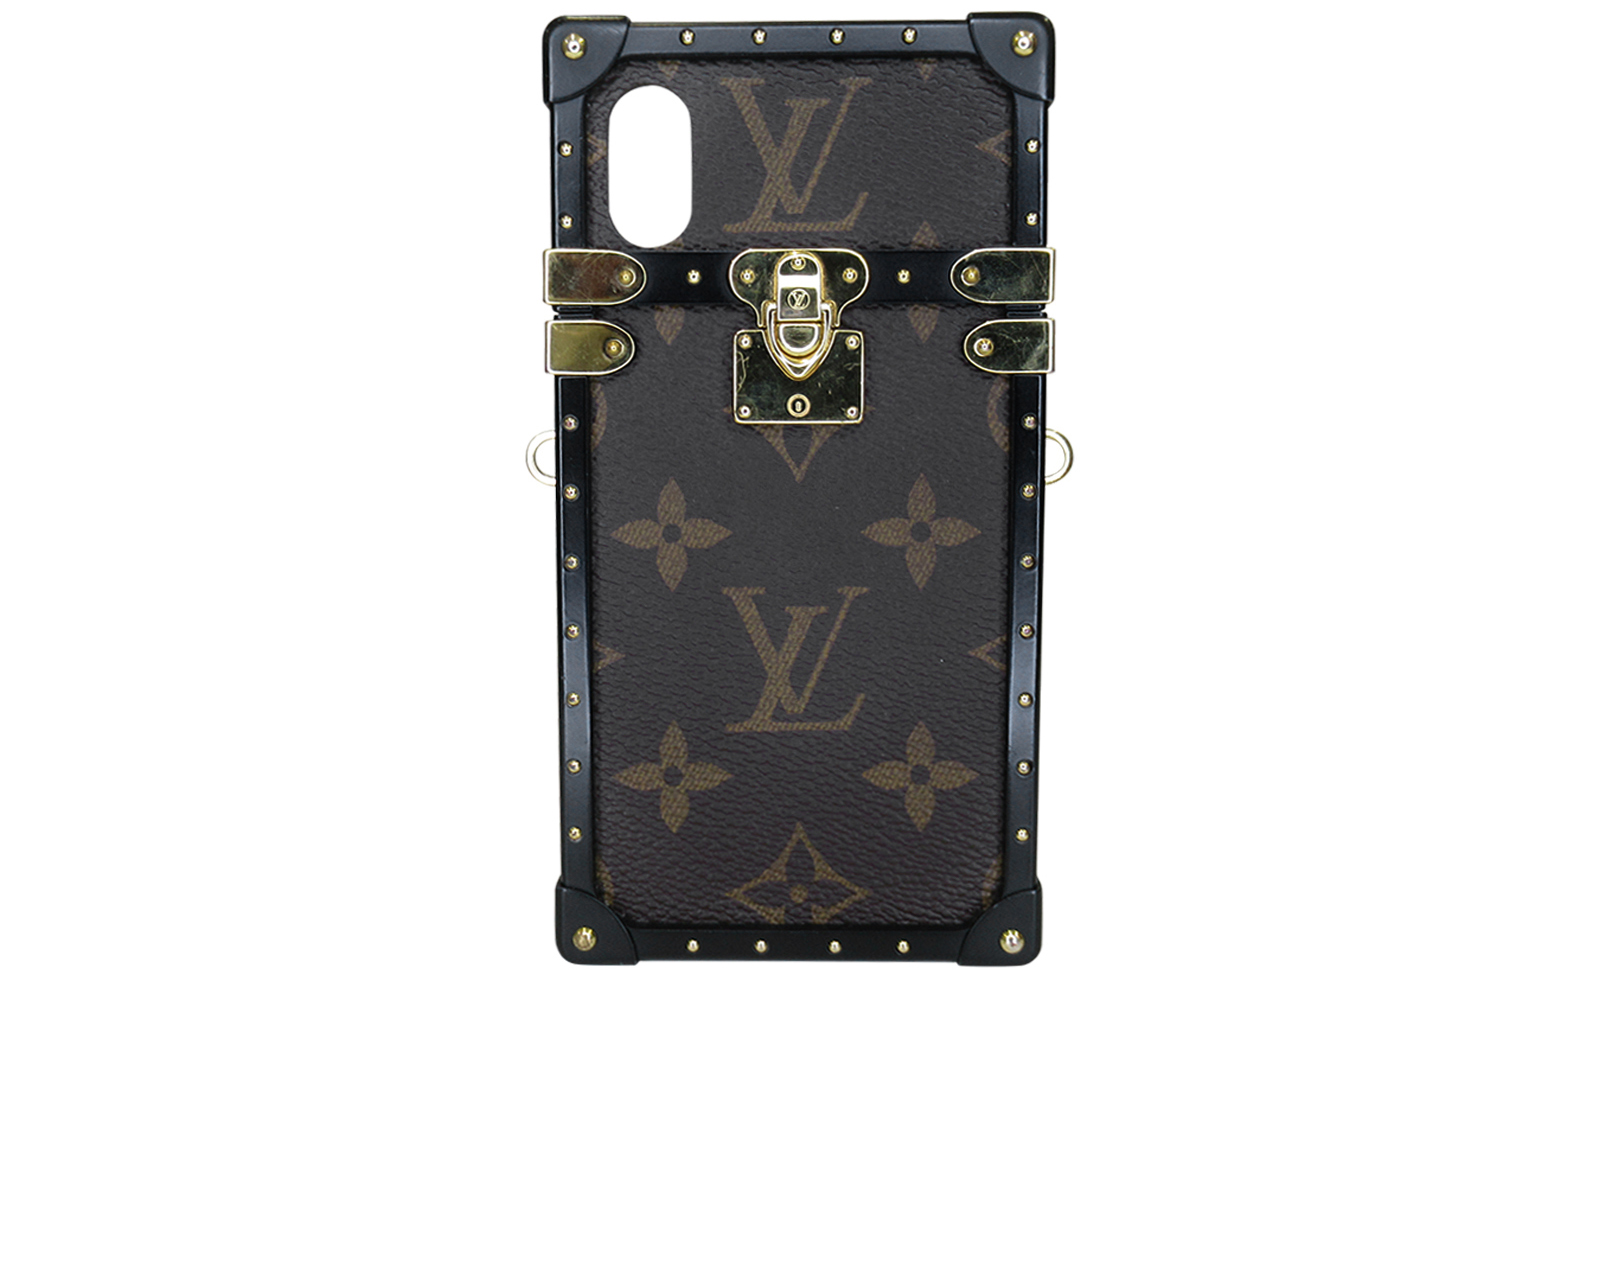 Louis Vuitton Cell Phone Accessories for Apple iPhone X for sale